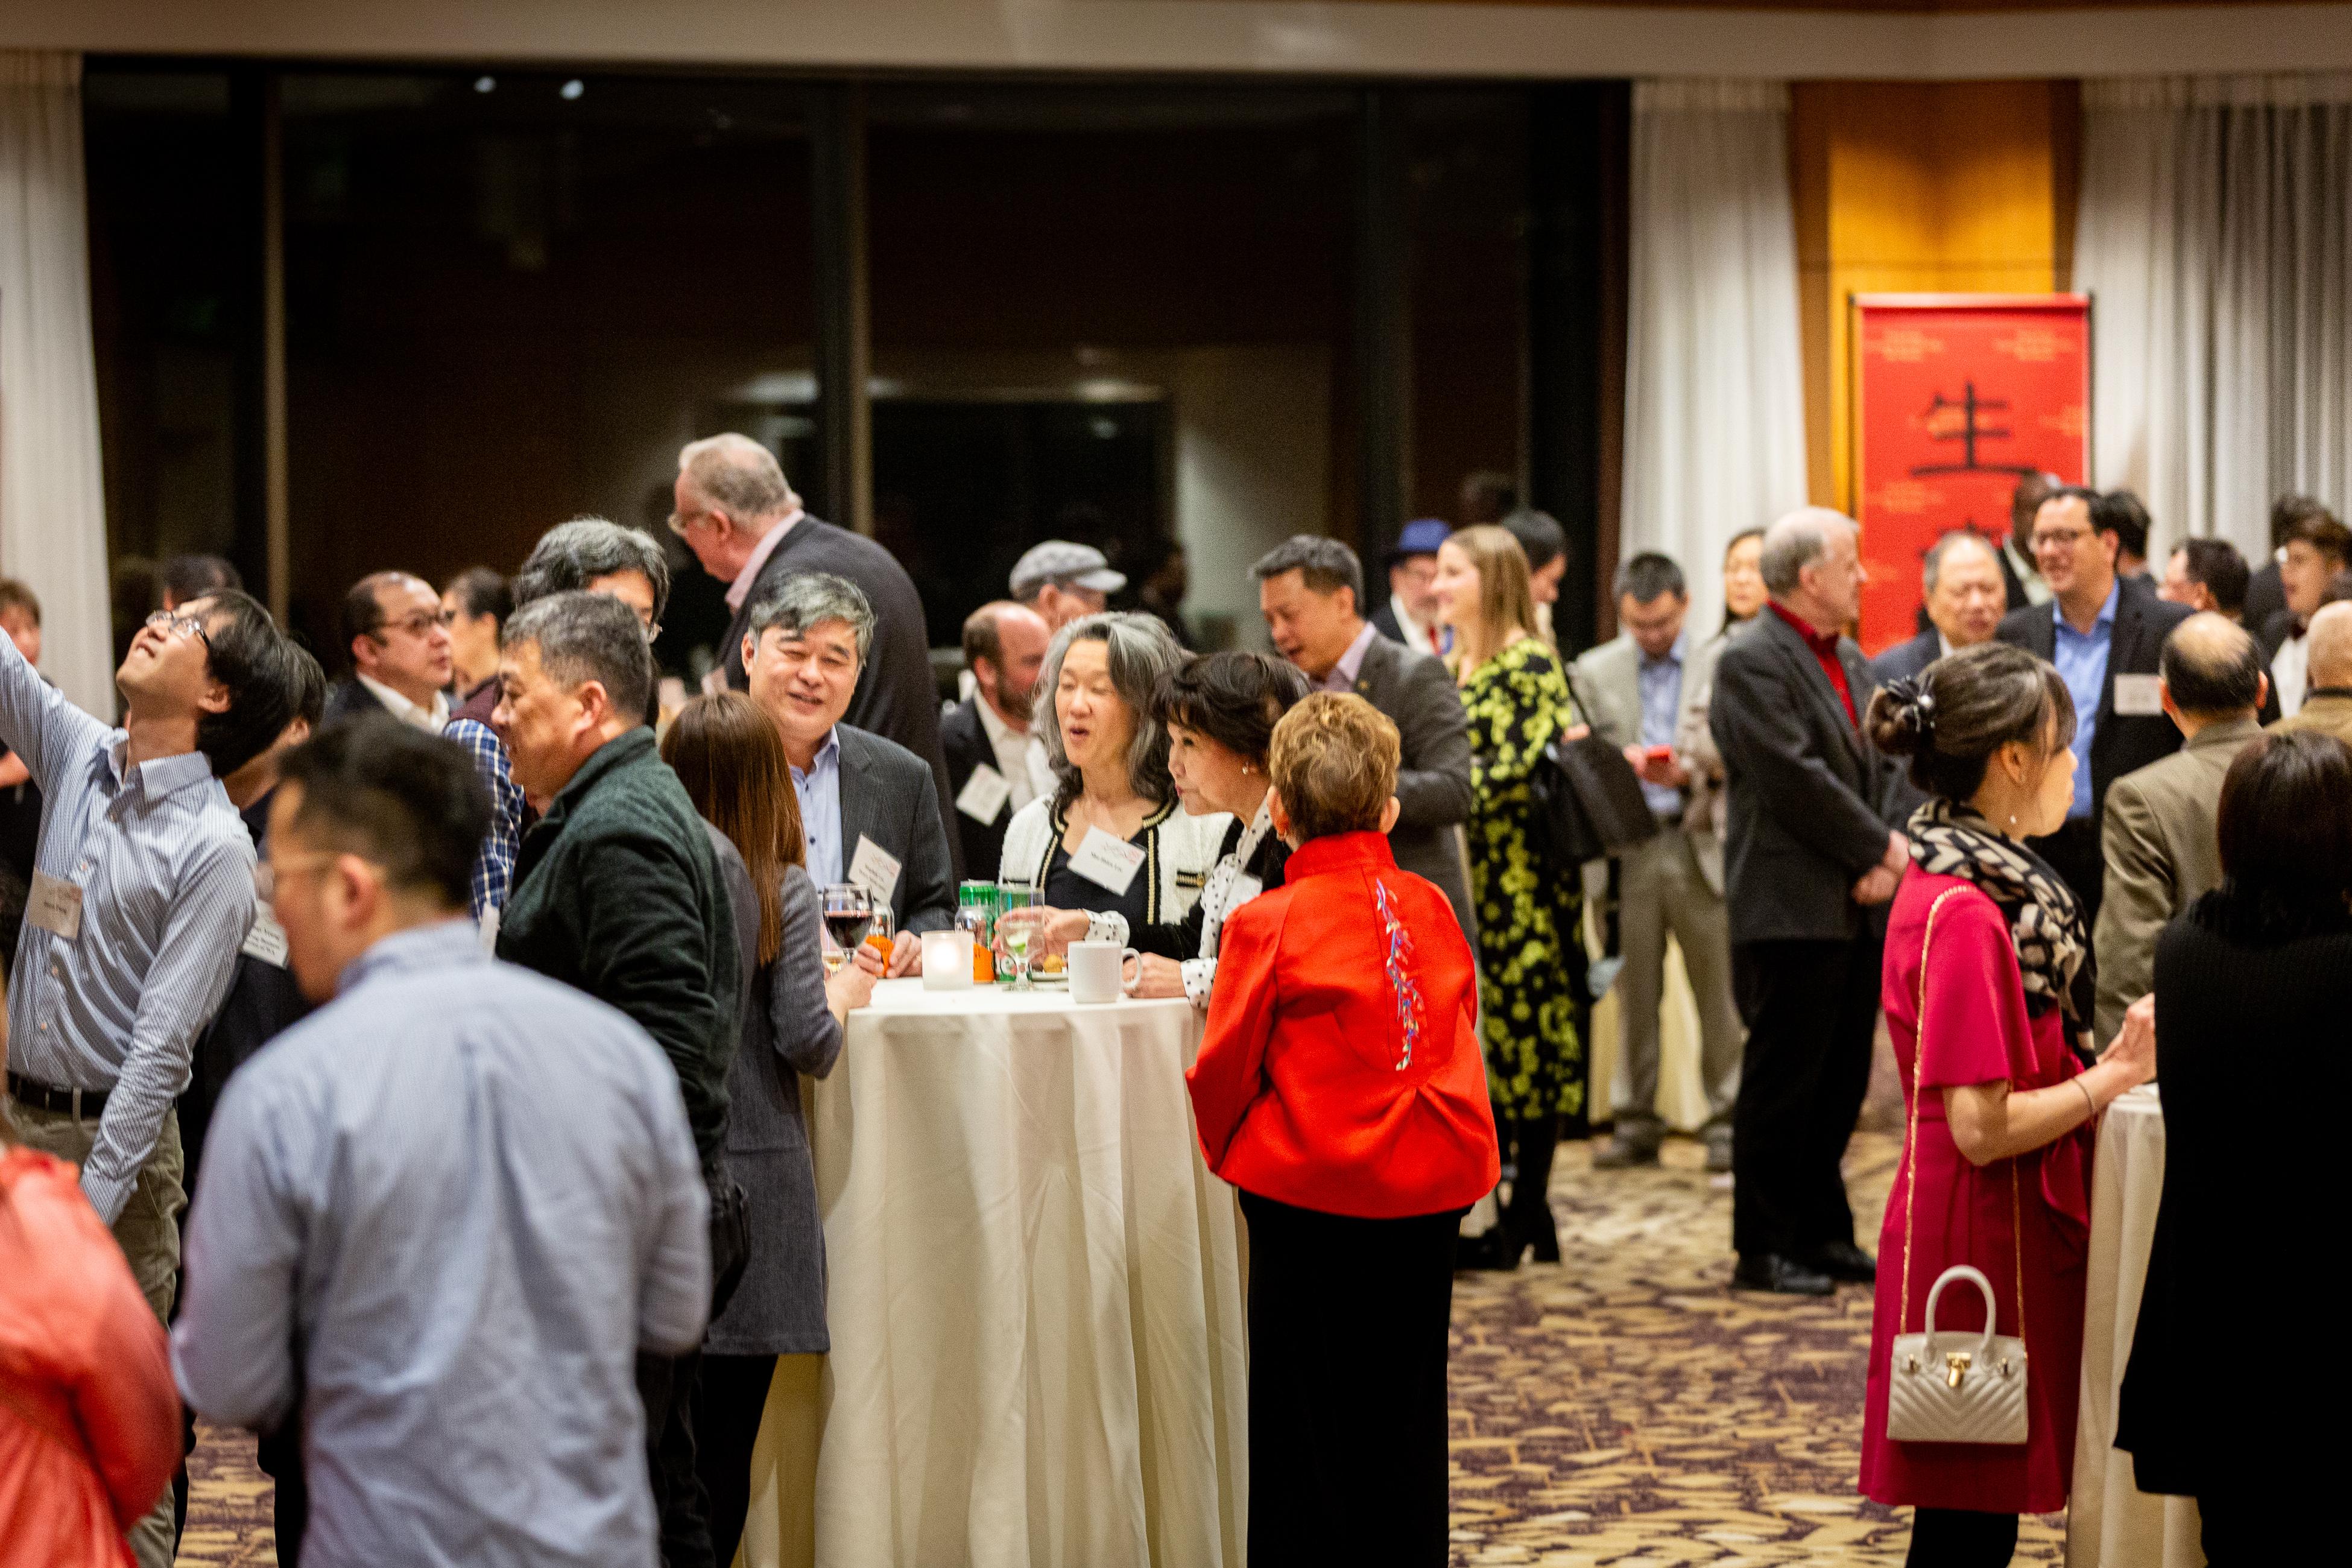 The spring reception in Seattle, Washington, hosted by the Hong Kong Economic and Trade Office in San Francisco on March 5 (Seattle time), was well attended by guests.